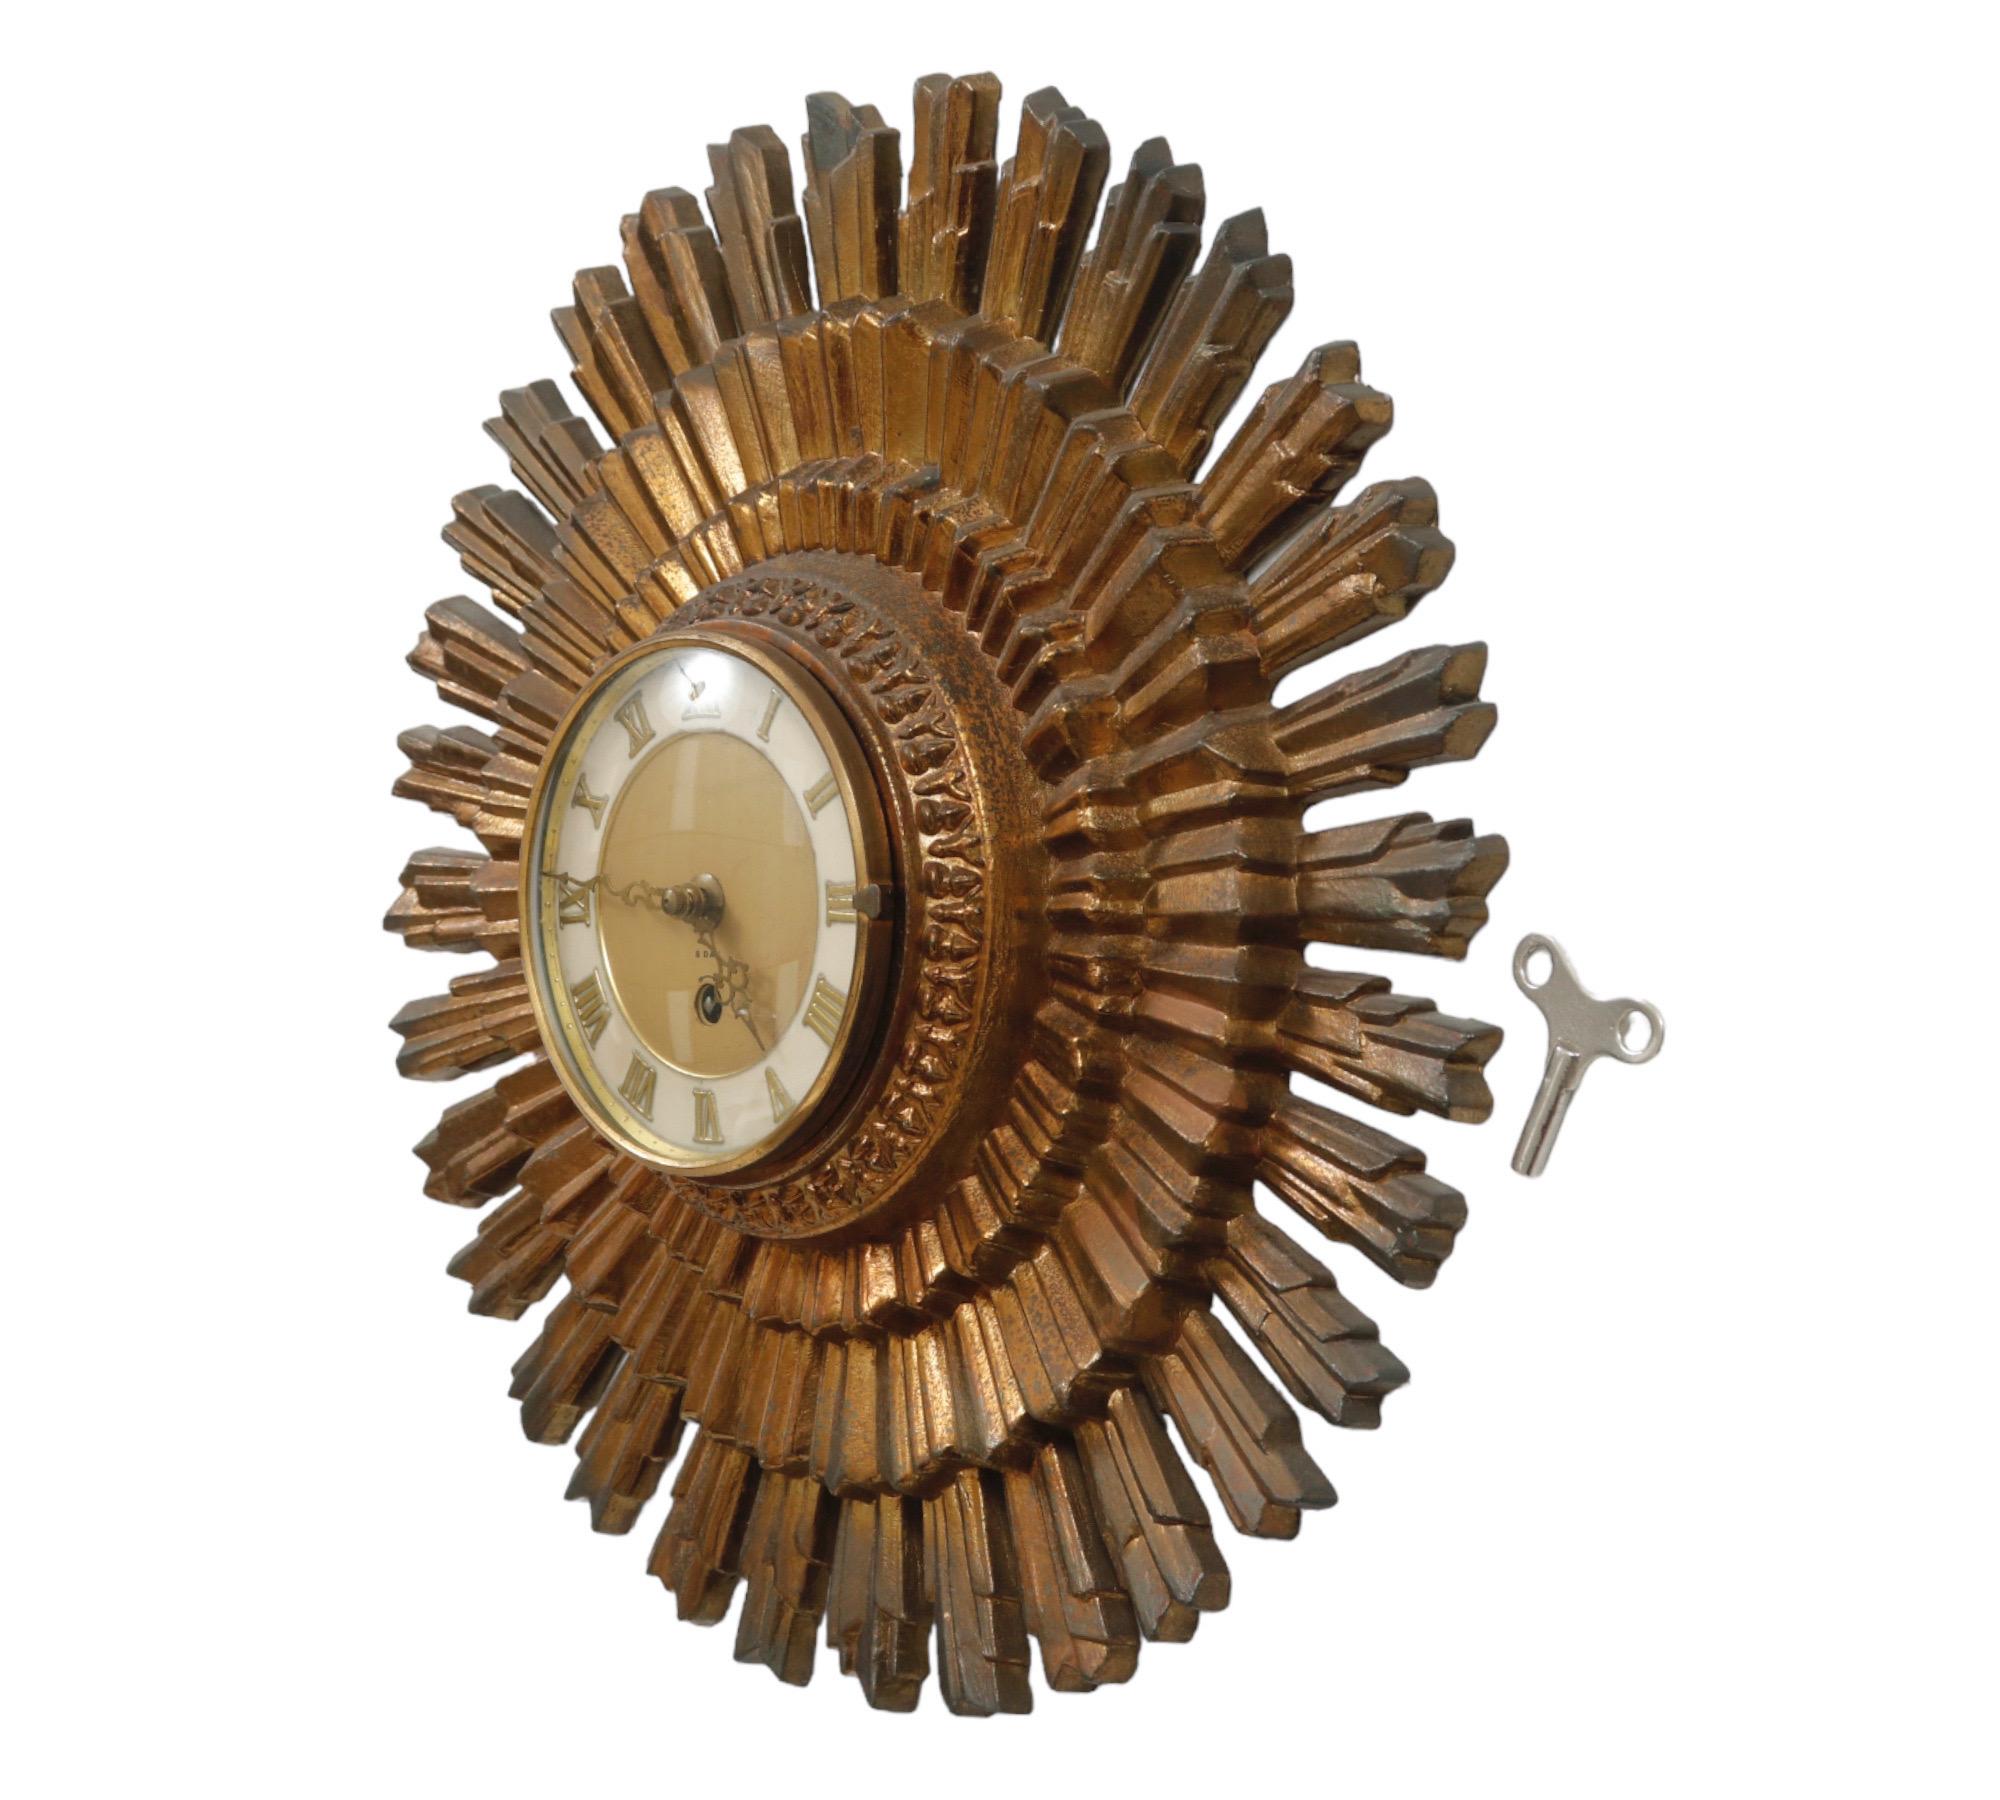 A round, decorative Hollywood Regency wall clock, circa 1960. A large metal sunburst frame in the original finish surrounds a clock face with a glass front that opens. Roman numerals and ornate cast brass hands tell the time. The mechanism winds